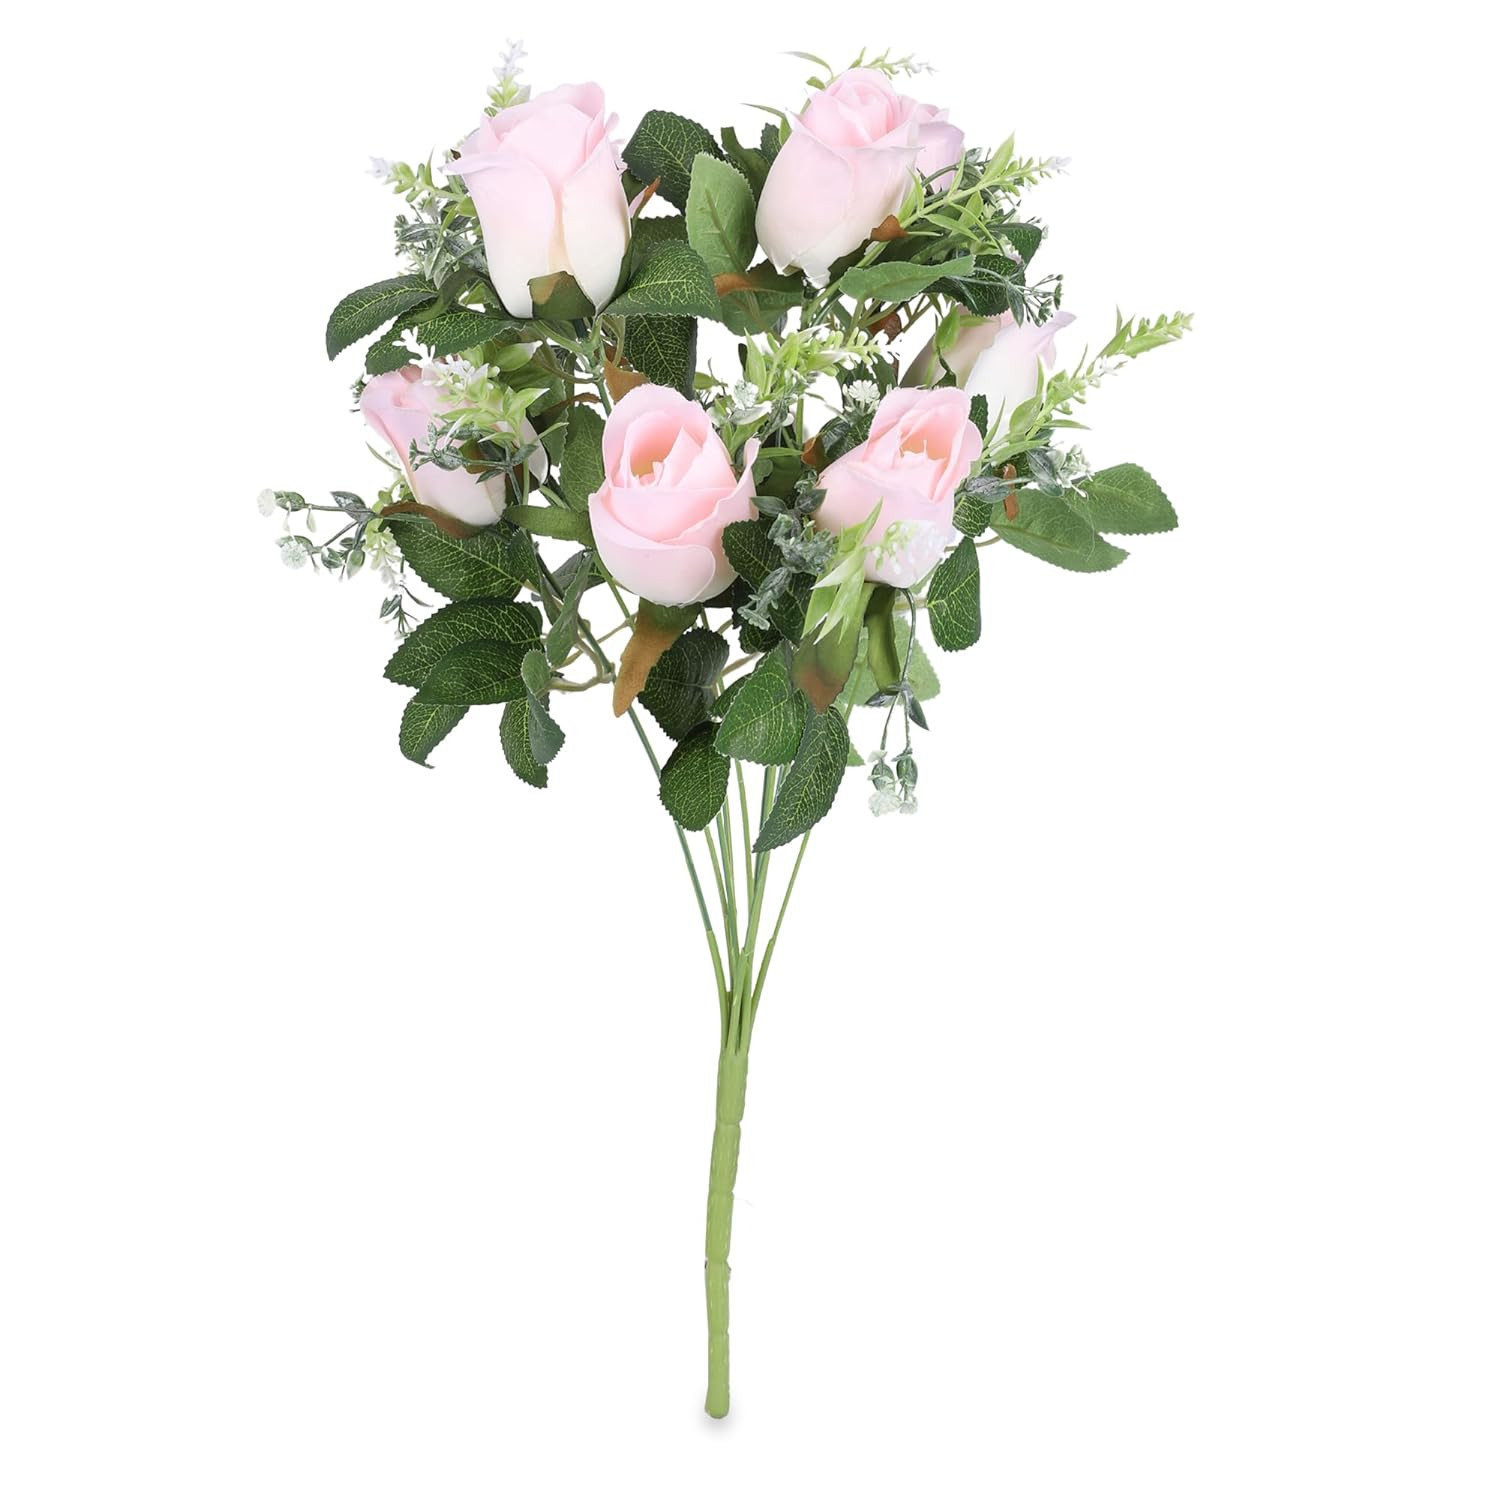 Kuber Industries Artificial Flowers for Home DÃ©cor|Natural Looking Indoor Fake Flowers for Vase|Artificial Flowers for Decoration|Without Basket (Pink)